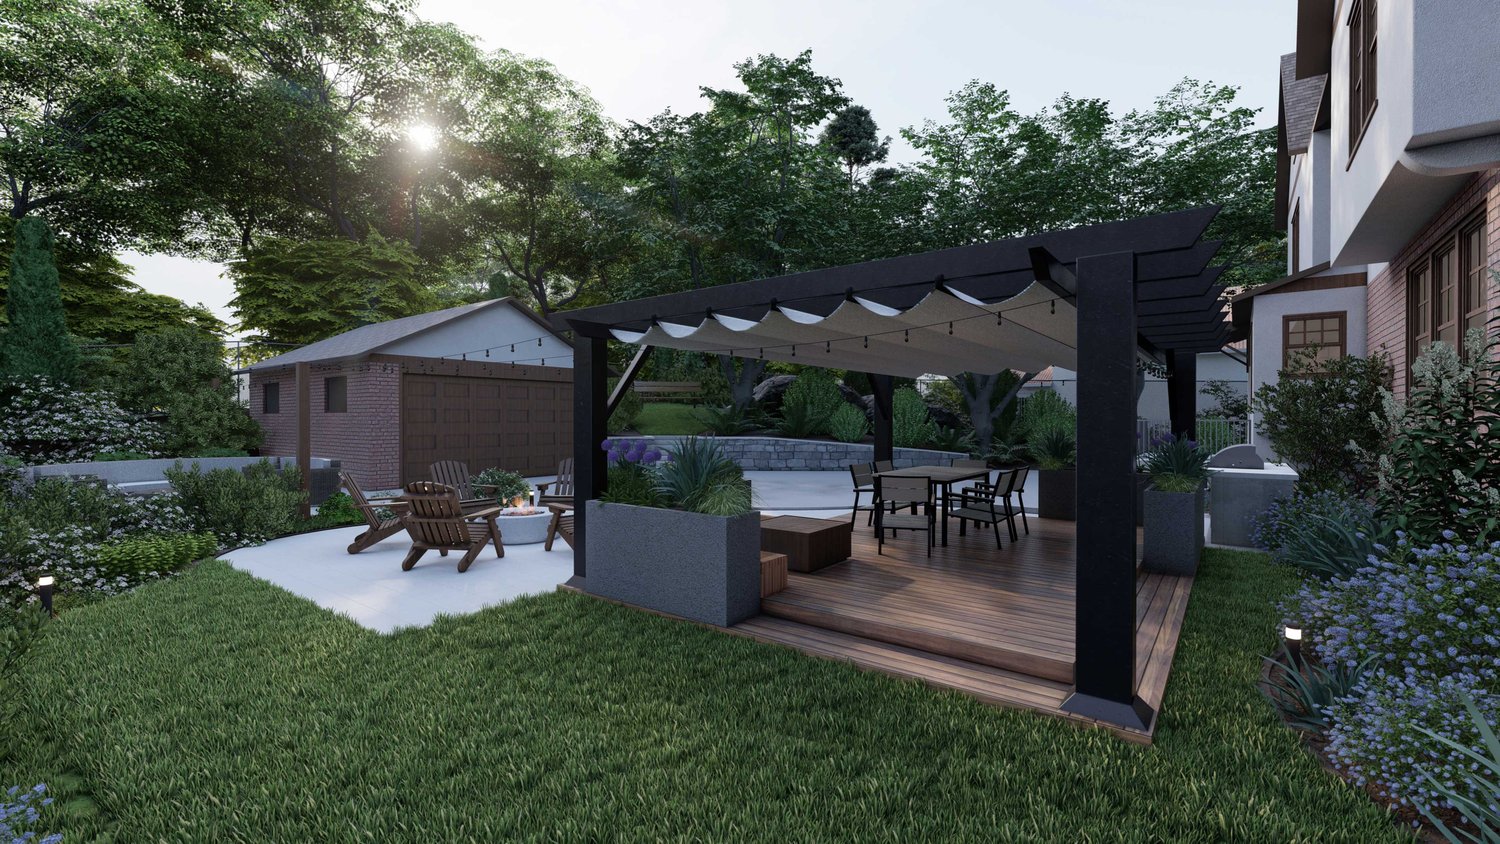 Long Island pergola with canopy over deck patio dining area and concrete fire pit seating area in a backyard